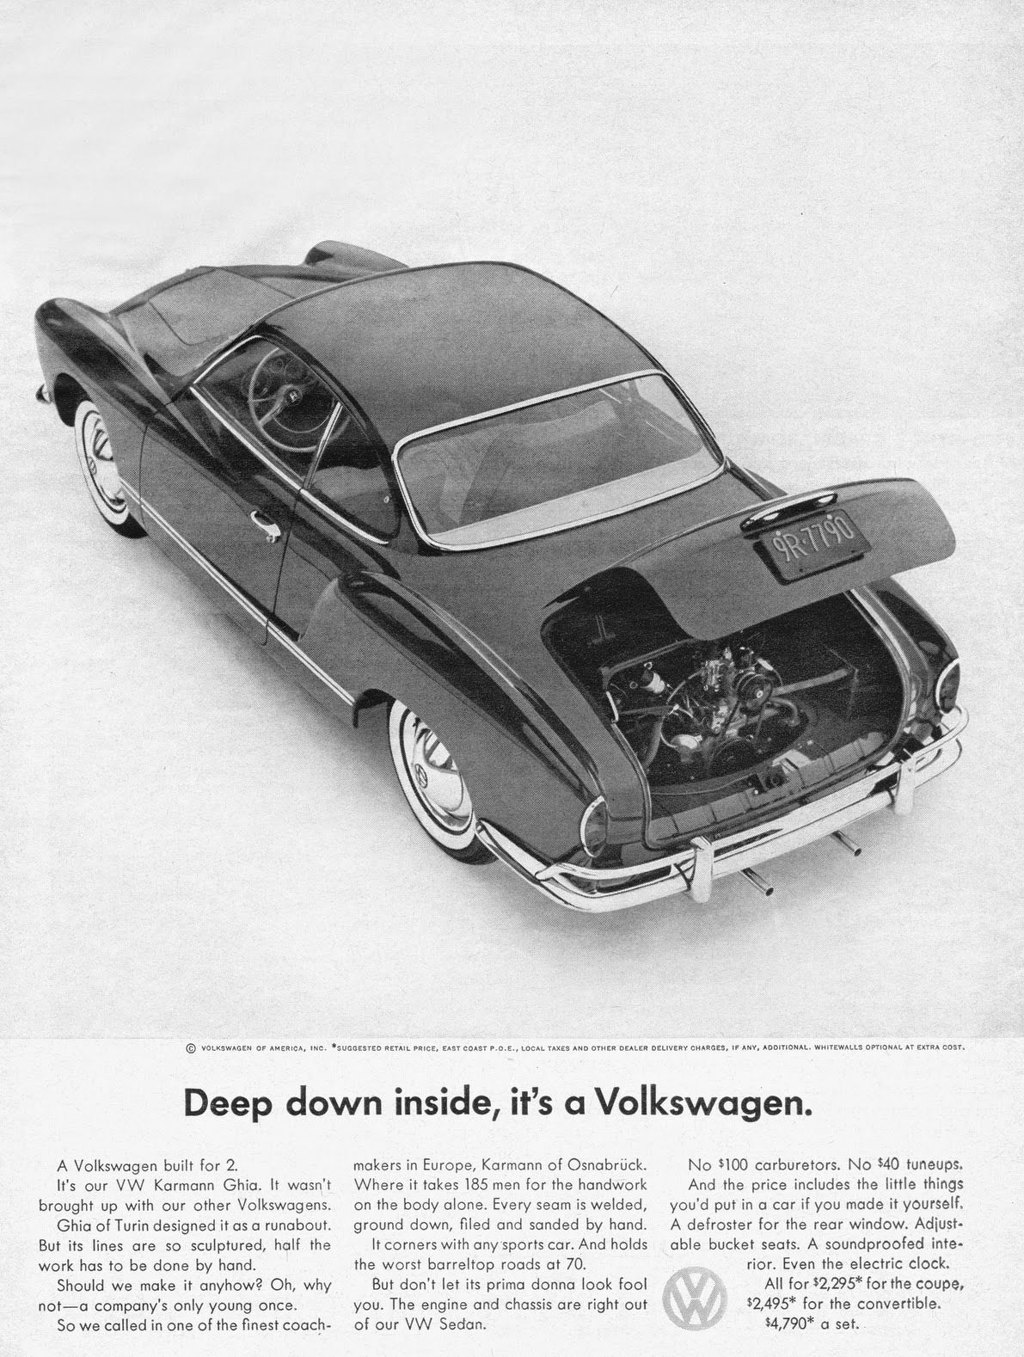 
Deep down inside, it's a Volkswagen. 
A Volkswagen built for 2. It's our VW Karmann Ghia. It wasn't brought up with our other Volkswagens. Ghia of Turin designed it as a runabout. But its lines are so sculptured, half the work has to be done by hand. Should we make it anyhow? Oh, why not—a company's only young once. So we called in one of the finest coach-
makers in Europe, Karmann of Osnabruck. Where it takes 185 men for the handwork on the body alone. Every seam is welded, ground down, filed and sanded by hand. It corners with any sports car. And holds the worst barreltop roads at 70. But don't let its prima donna look fool you. The engine and chassis are right out of our VW Sedan. 
No $100 carburetors. No $40 tuneups. And the price includes the little things you'd put in a car if you made it yourself. A defroster for the rear window. Adjust-able bucket seats. A soundproofed inte-rior. Even the electric clock. All for $2,295* for the coupe, $2,495* for the convertible. $4,790* a set. 
